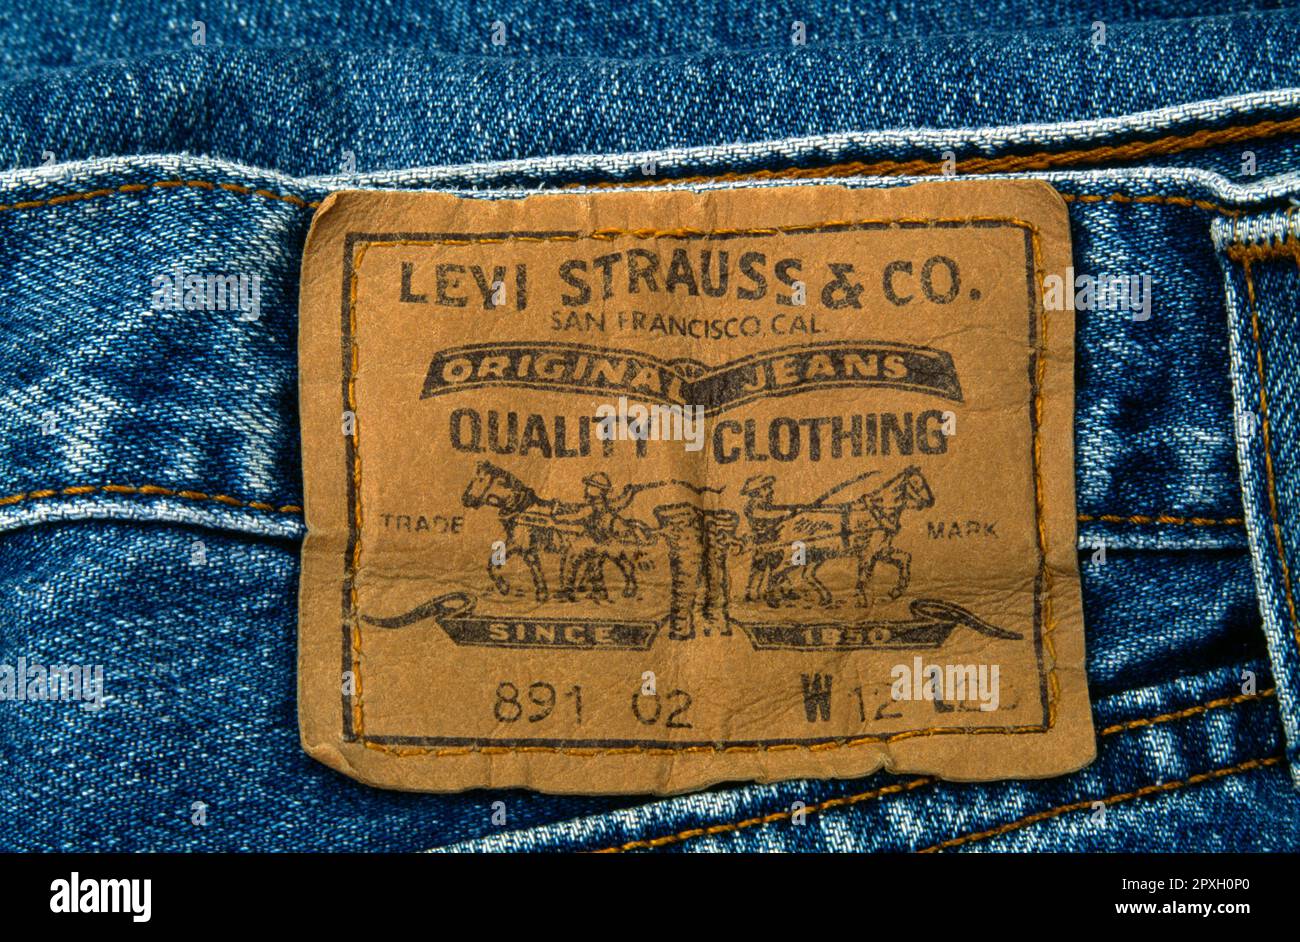 Levi strauss Original jeans Label on a Pair of Jeans Stock Photo